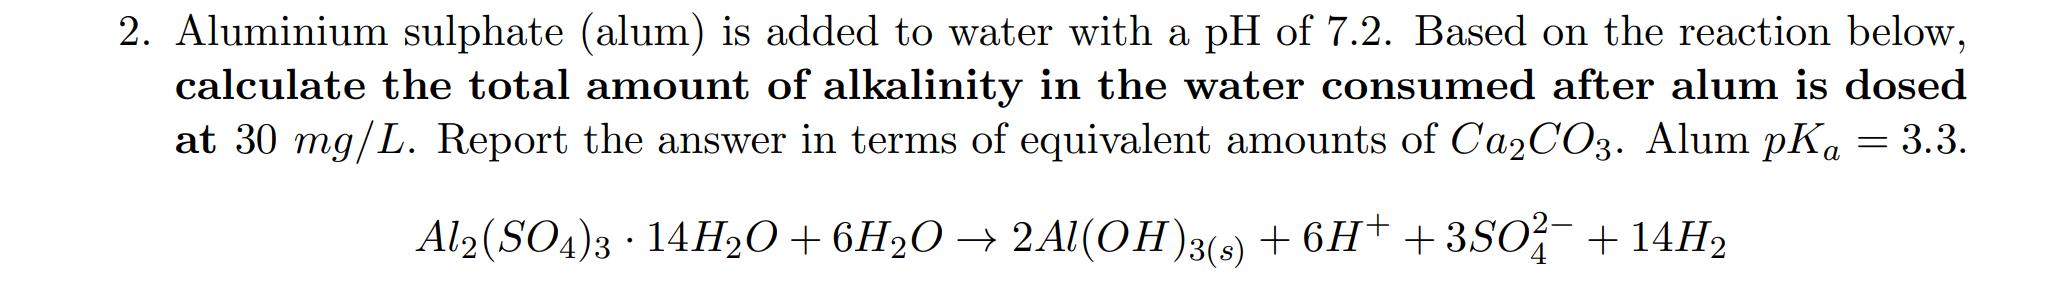 2. Aluminium sulphate (alum) is added to water with a pH of 7.2. Based on the reaction below,
calculate the total amount of alkalinity in the water consumed after alum is dosed
at 30 mg/L. Report the answer in terms of equivalent amounts of CA2CO3. Alum pK, = 3.3.
Al2(SO4)3 · 14H2O+6H2O → 2Al(OH)3(3) + 6H† + 3SO + 14H2
